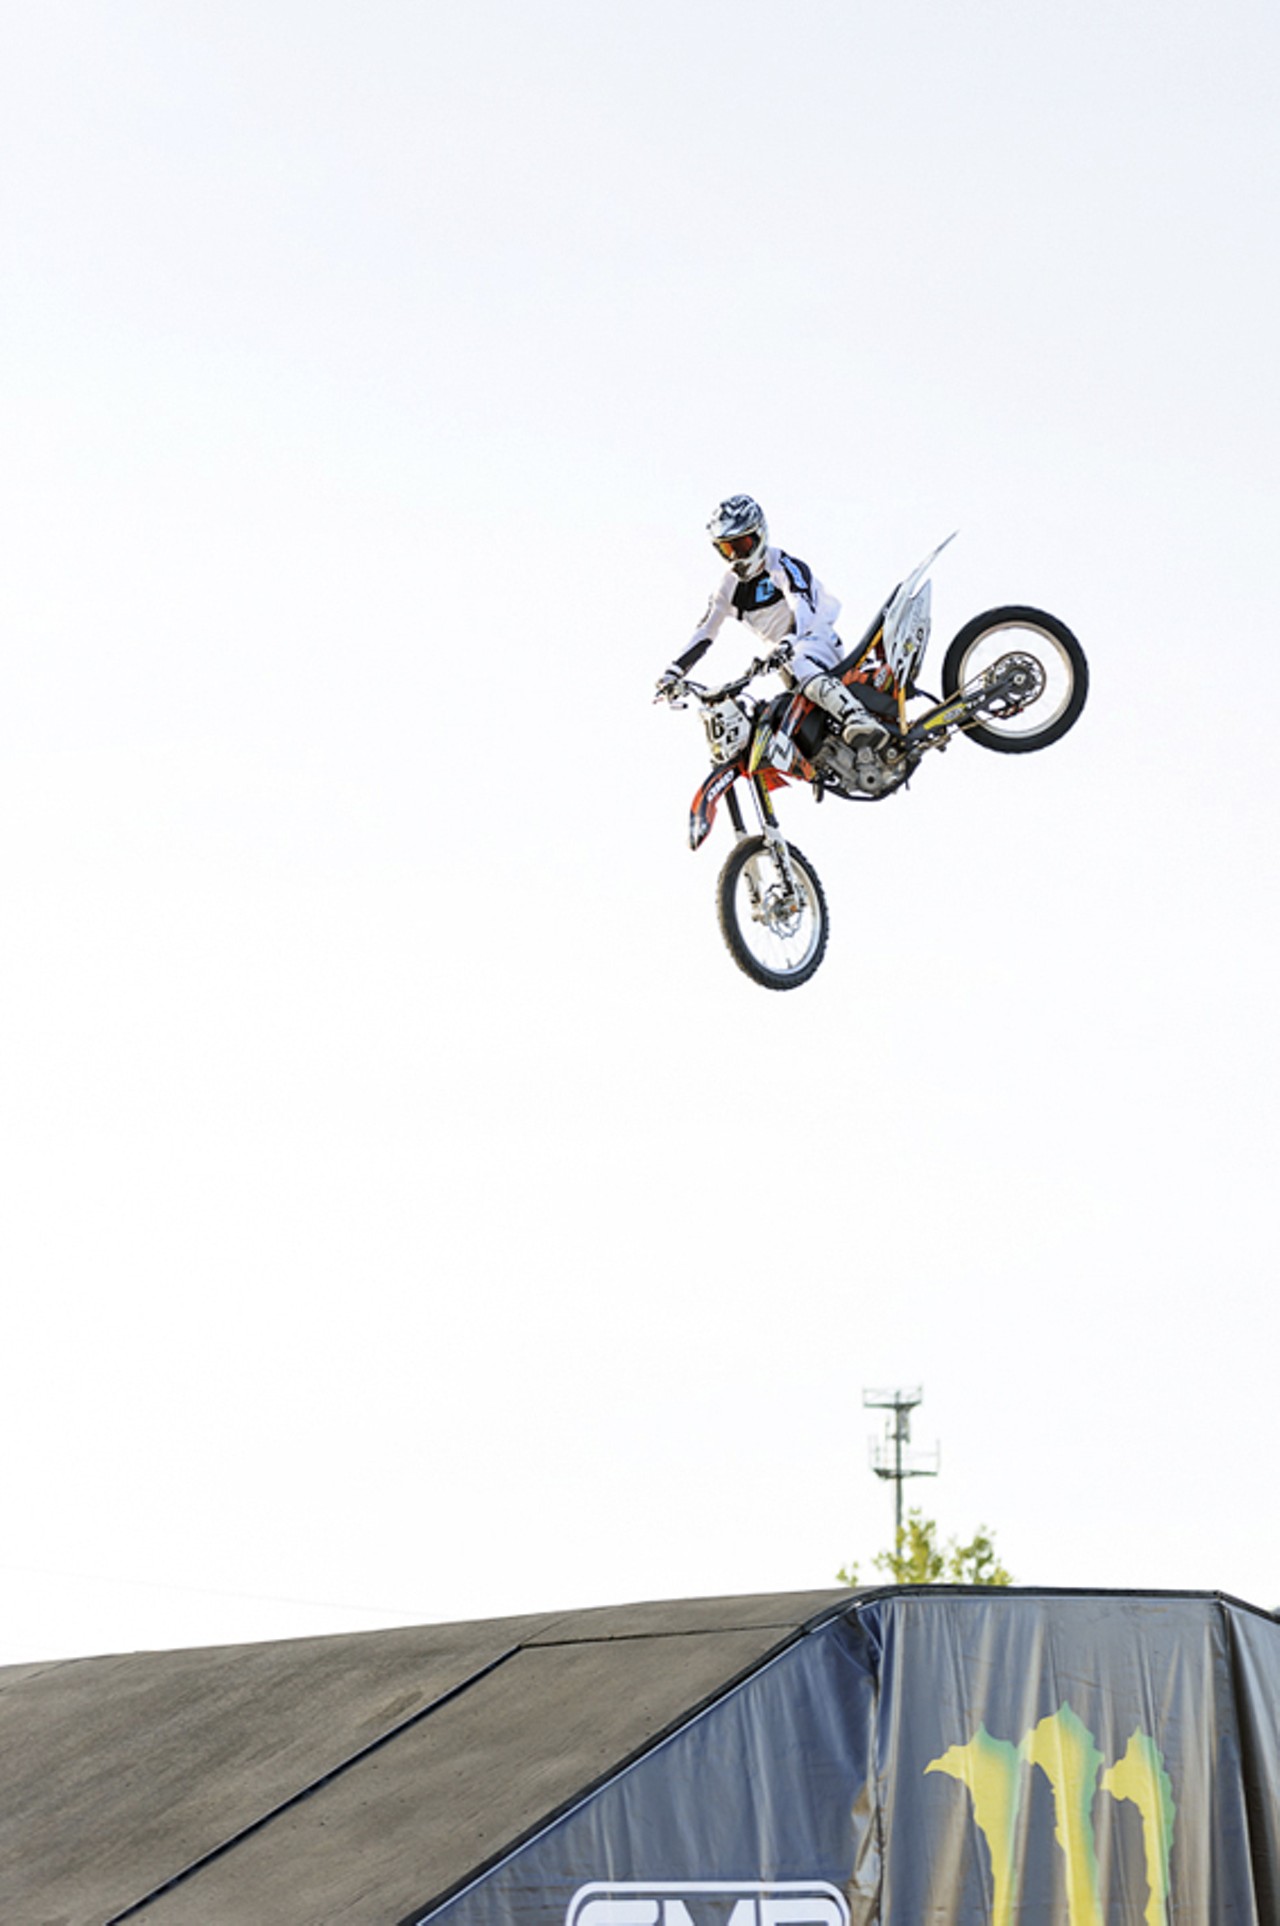 Before the bands in the arena started playing, Monster Energy had stunt bike riders performing in the parking lot.